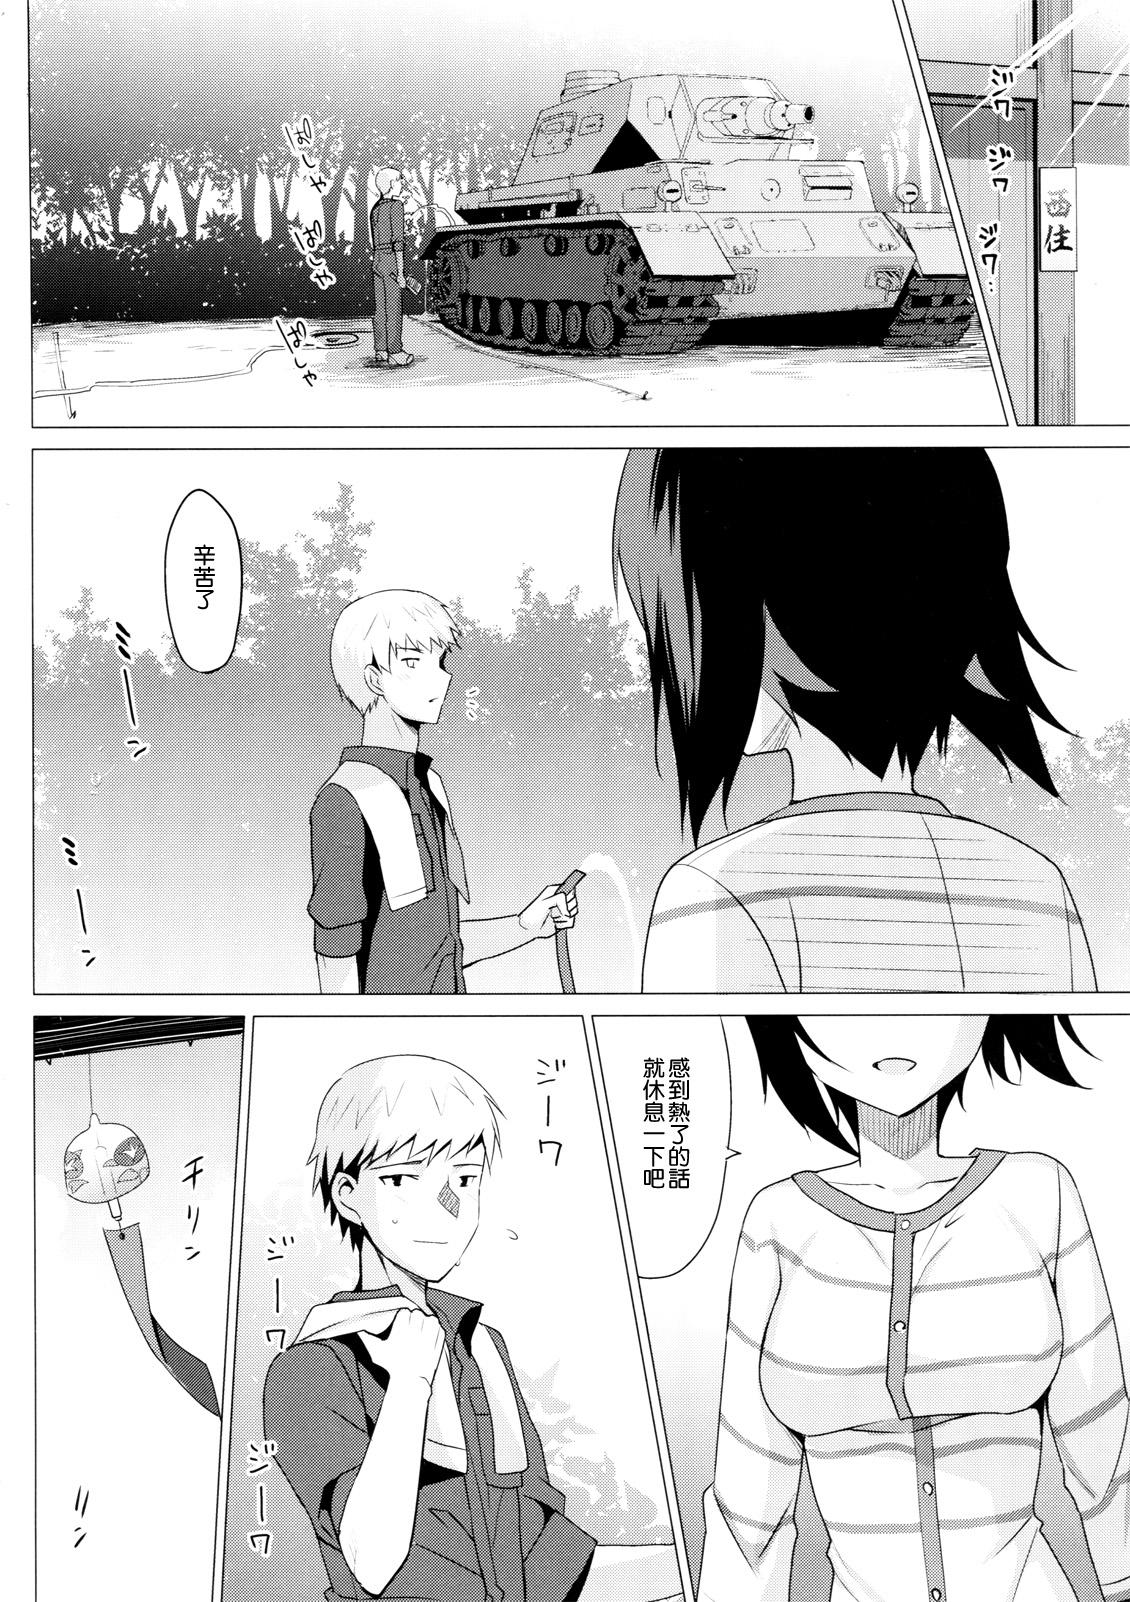 Exposed LET ME LOVE YOU - Girls und panzer Transgender - Page 5